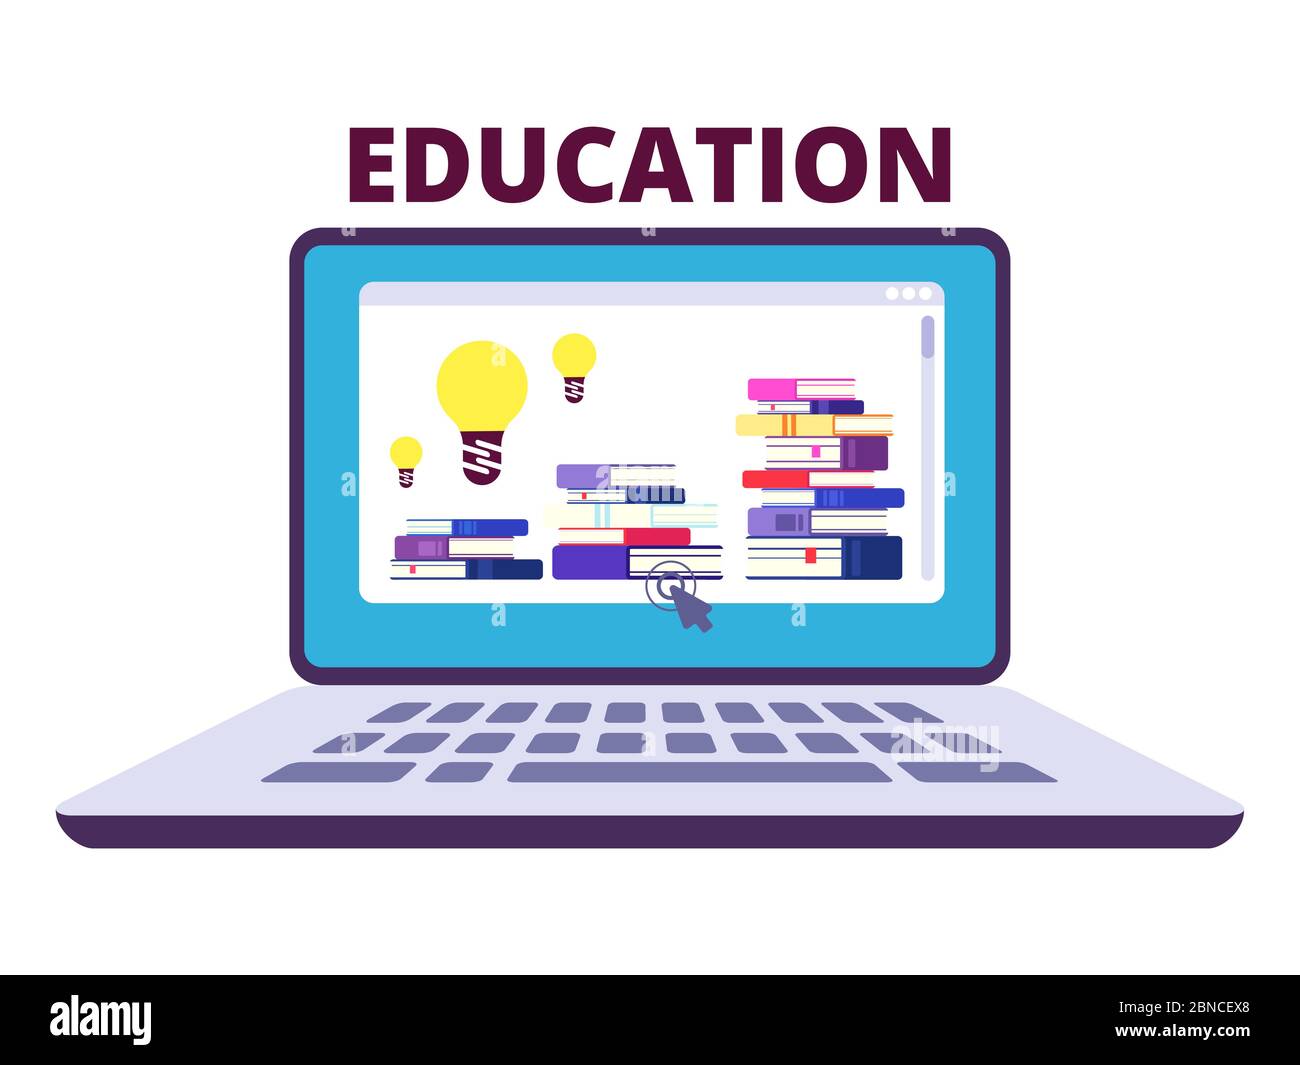 Online education vector concept with laptop isolated on white background. Education online, teaching and learning illustration Stock Vector